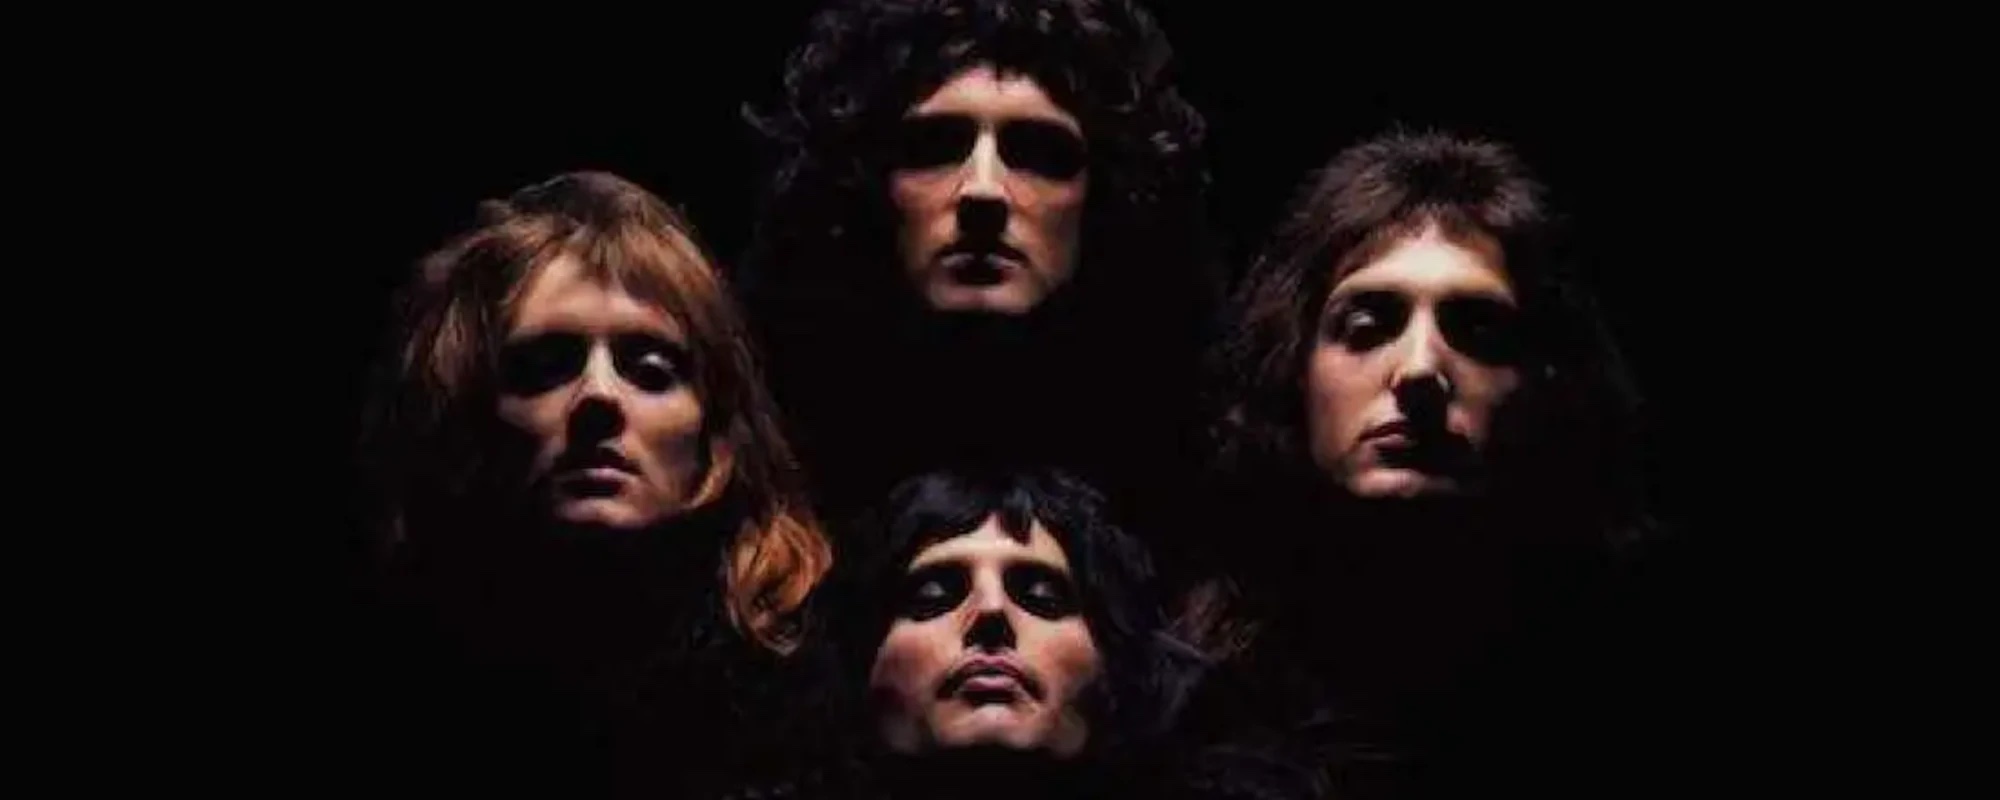 Previously Unheard Queen Song With Freddie Mercury to be Released